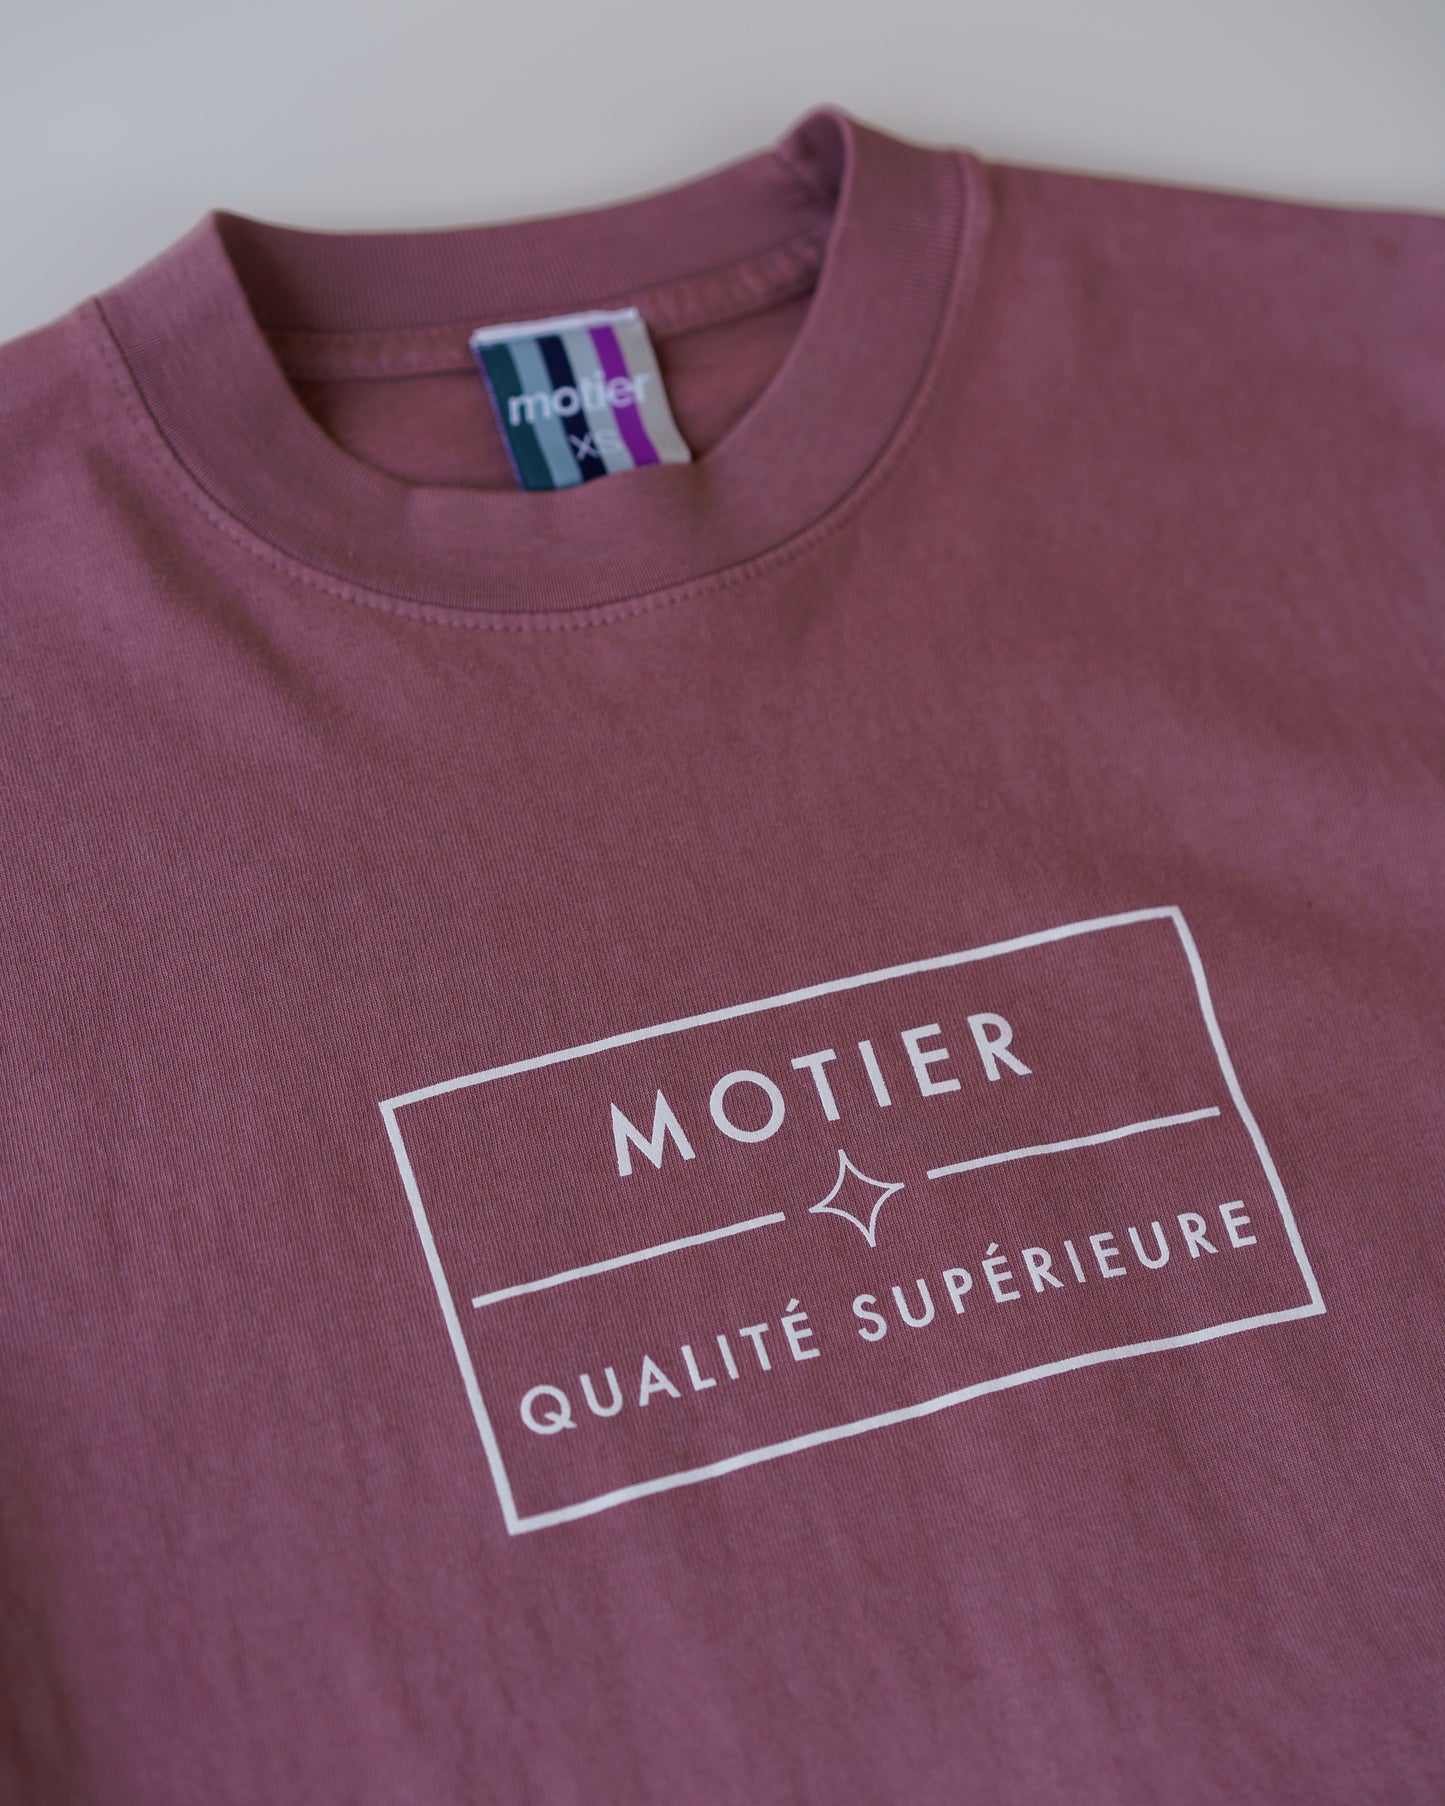 The Qualite Superieure Luxe Tee (Deep Mauve)